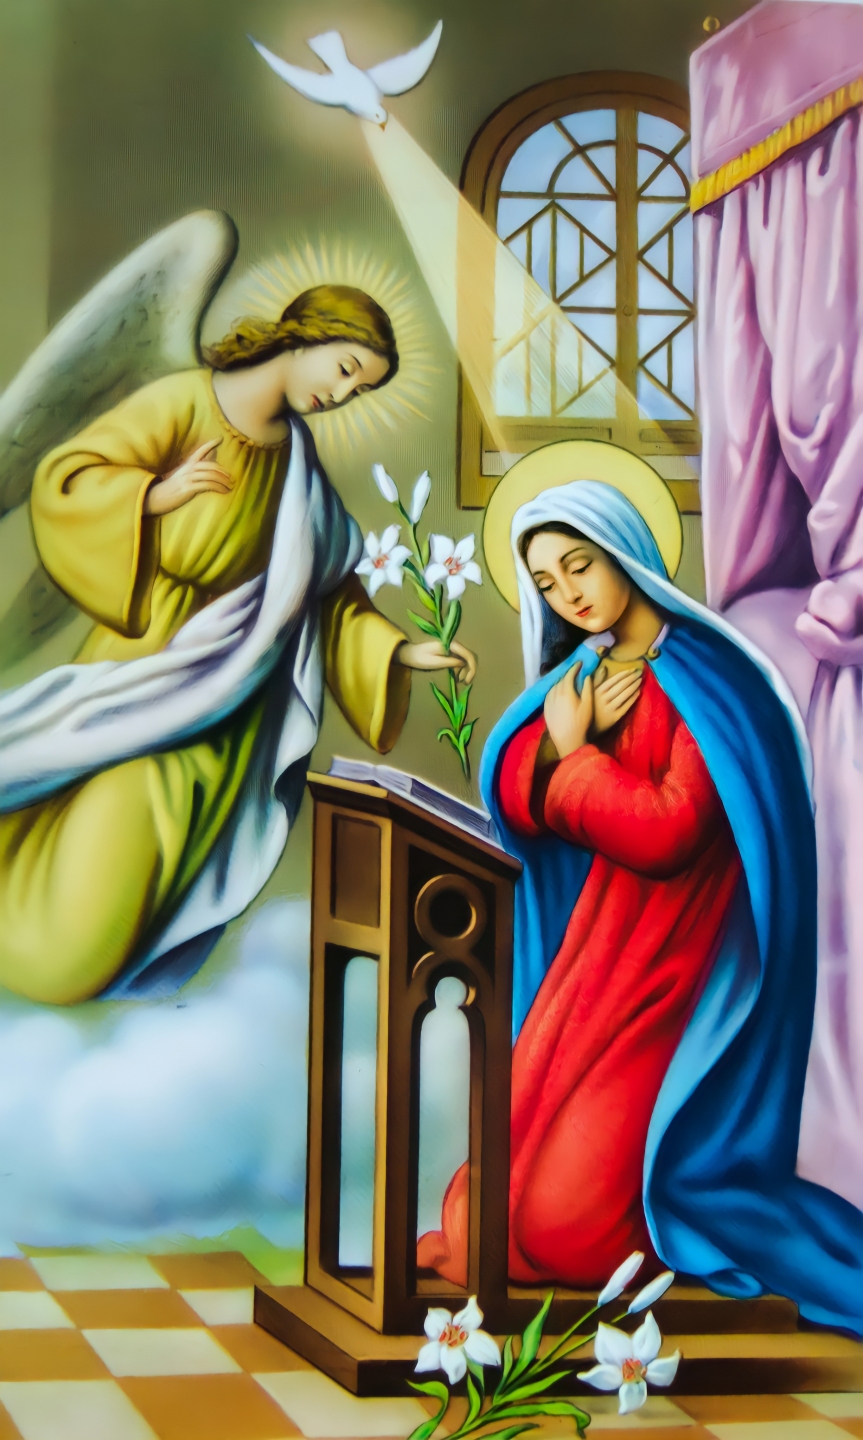 March 24th Night, Feast of Annunciation March 25 Observation